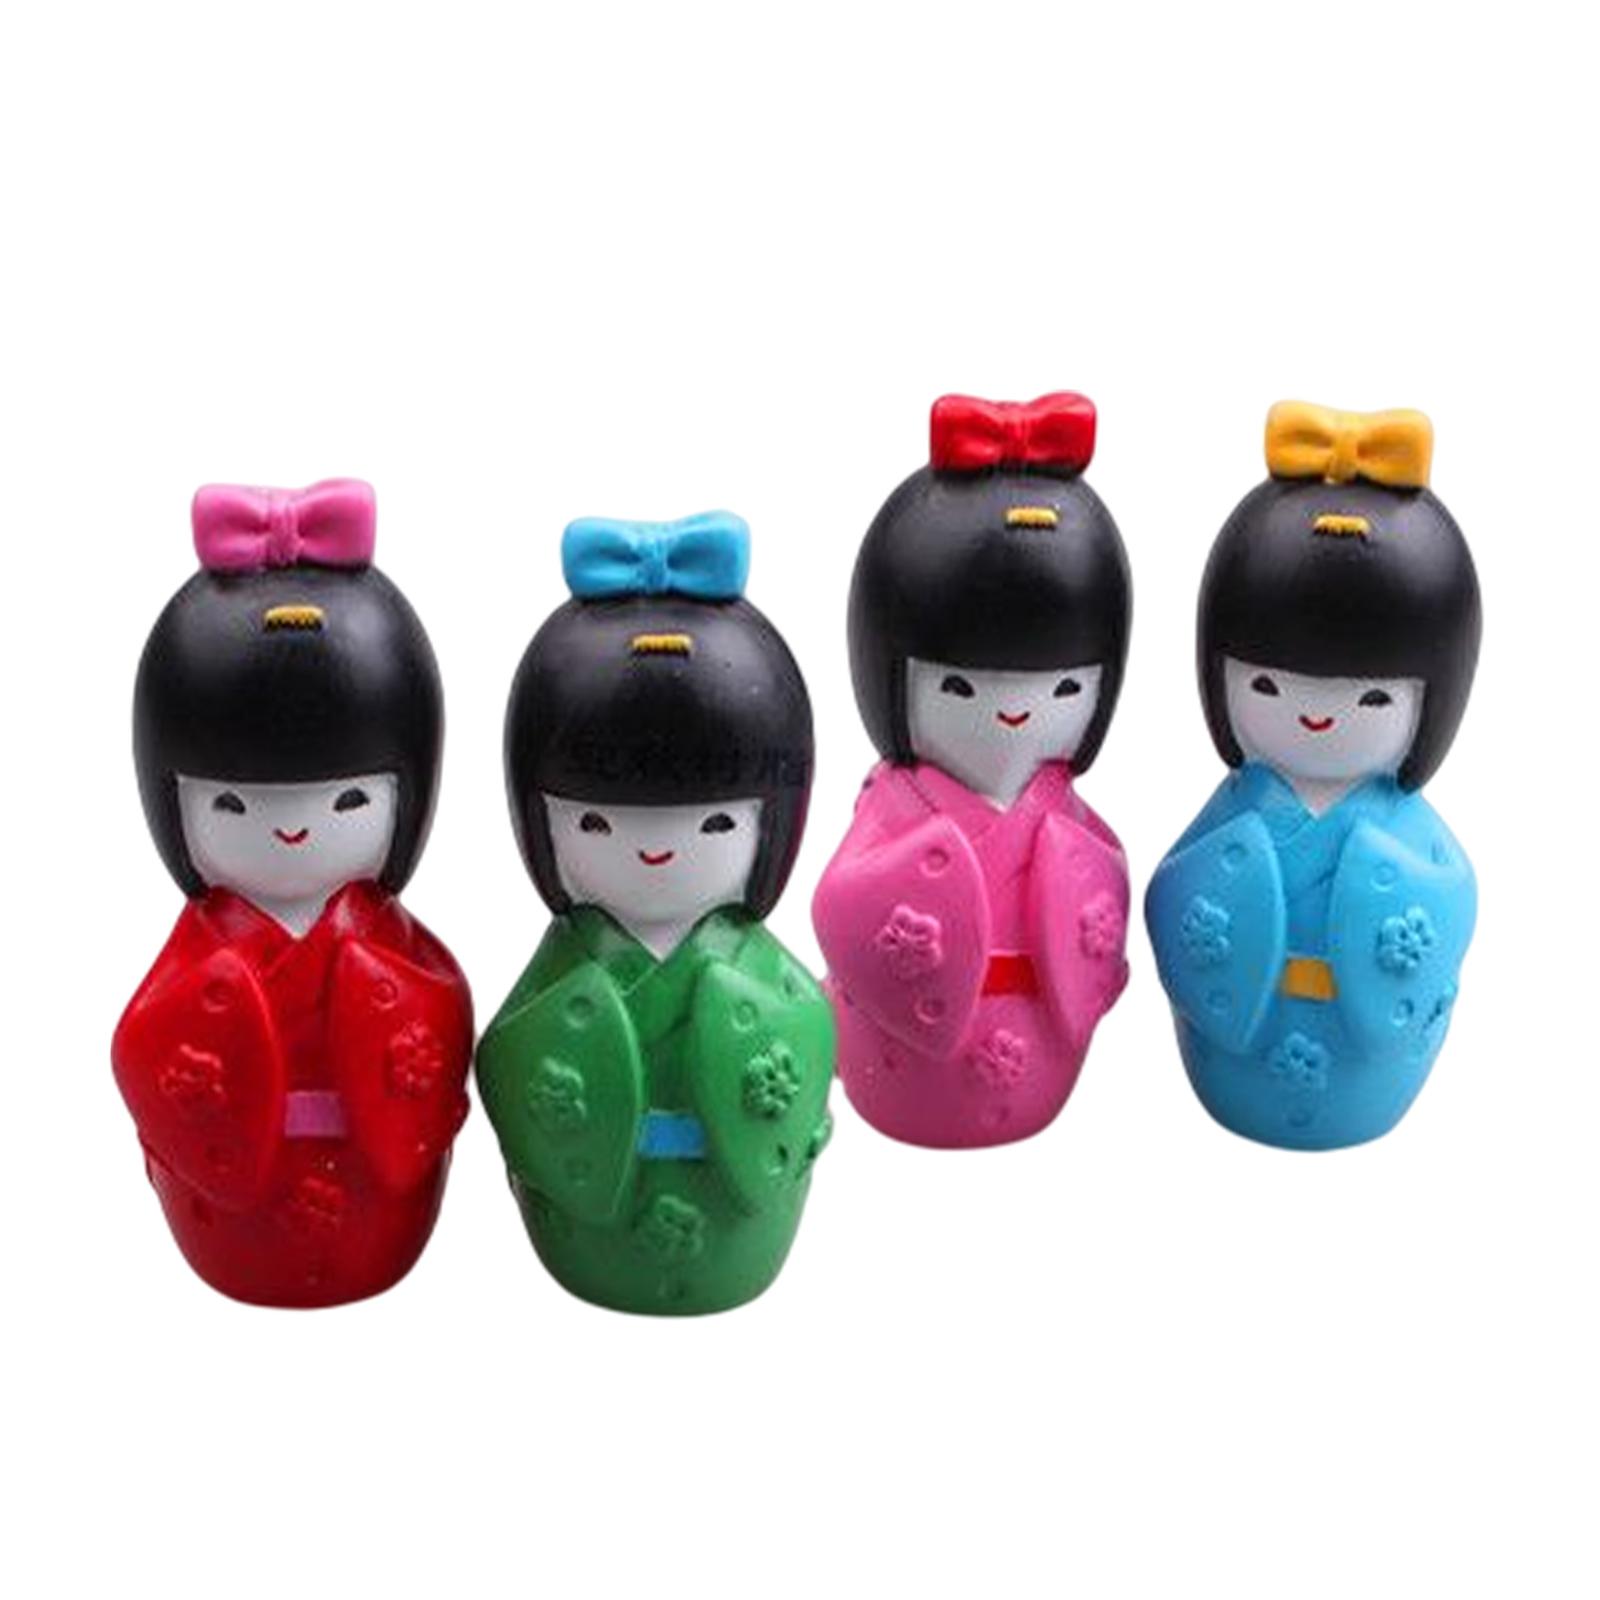 4x Handcrafted Japanese Doll Resin Statue Tabletop Decoration Exquisite